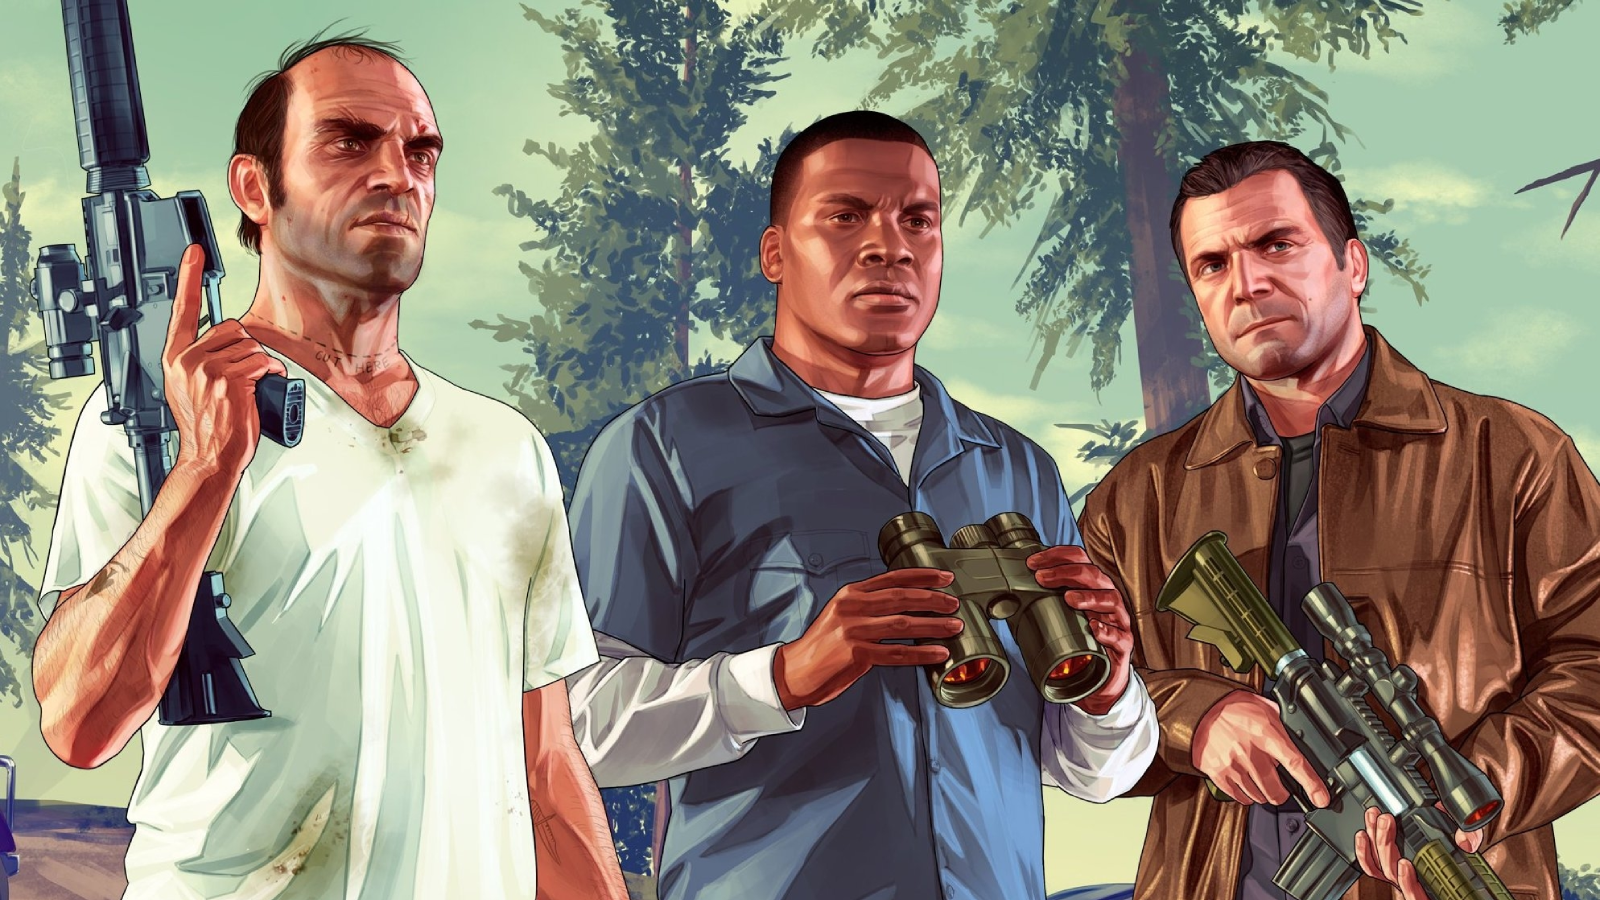 Grand Theft Auto 6 to be announced 'as early as this week